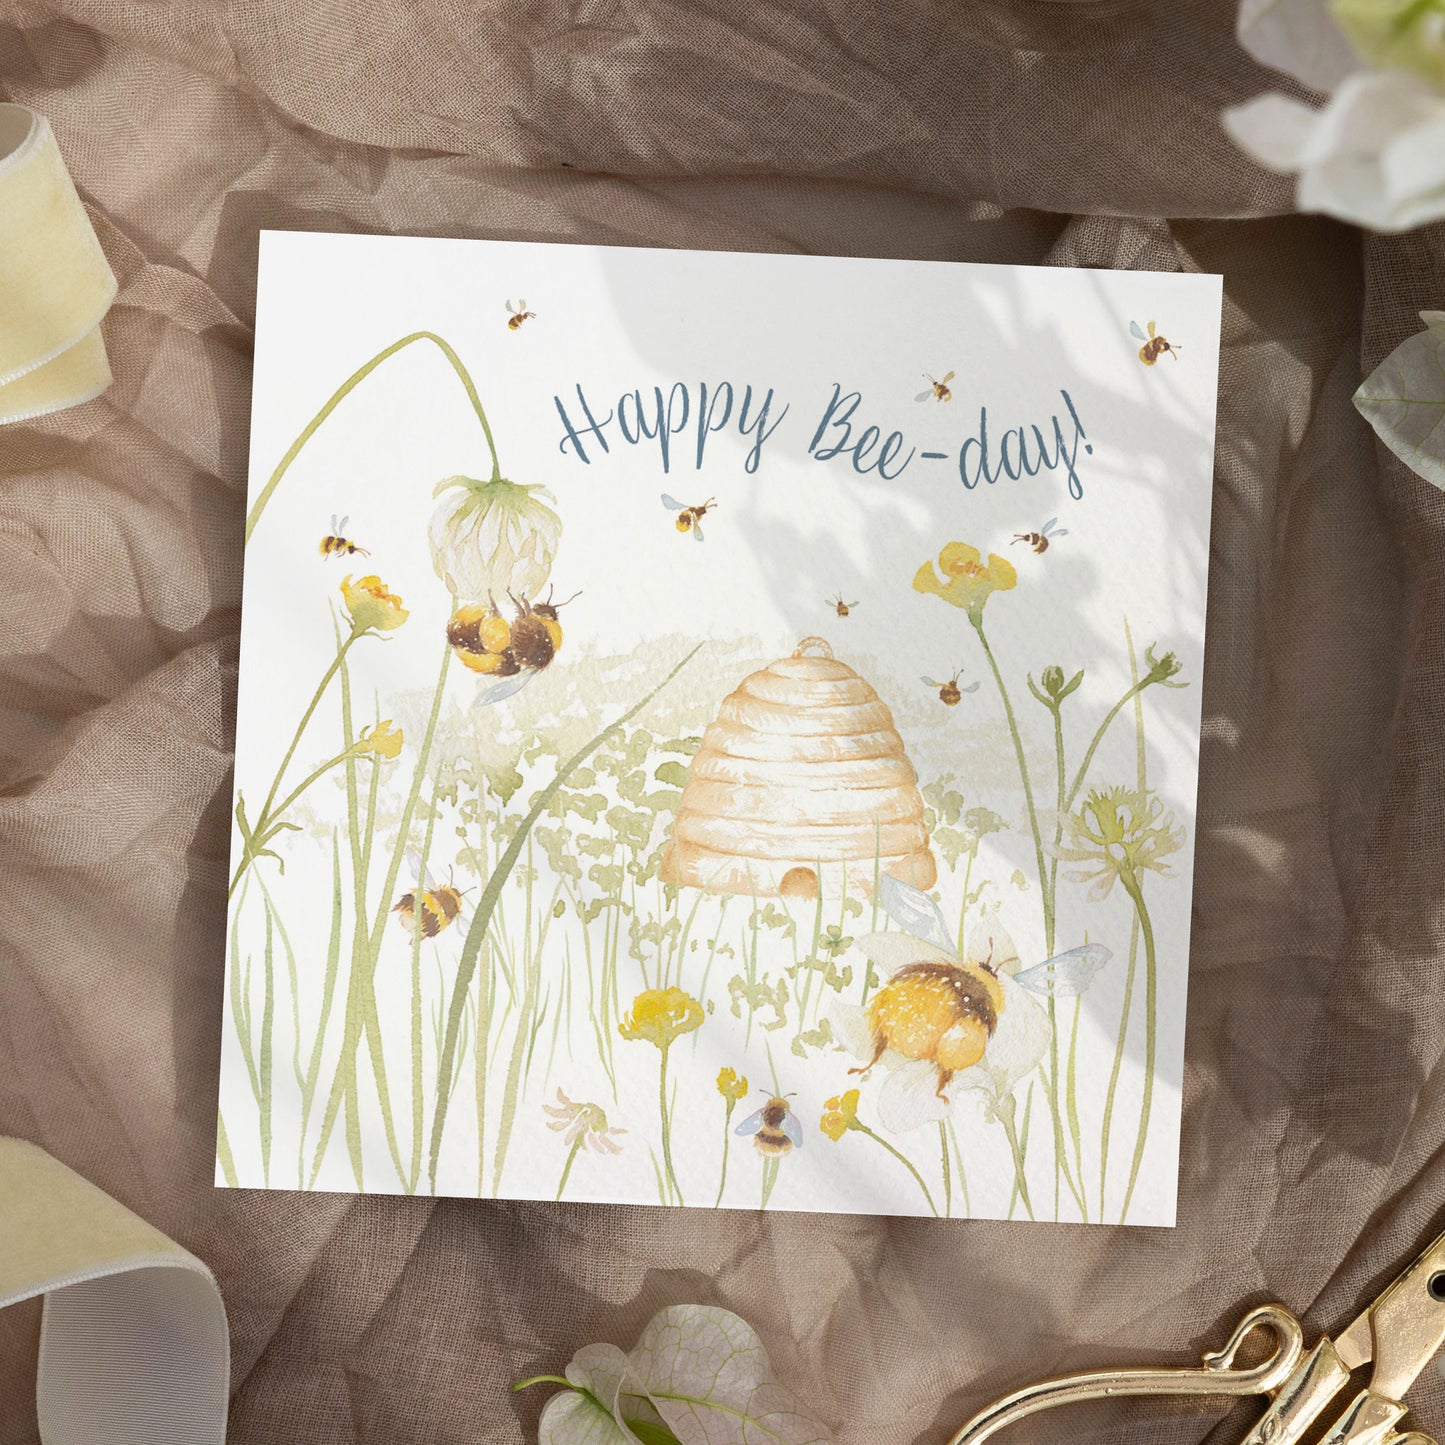 A greetings card laid flat on a table surrounded by gift wrapping items including scissors and ribbon. The card reads Happy Bee-day in dark blue text above a buttercup meadow full of bees around a traditional bee hive in a watercolour style.